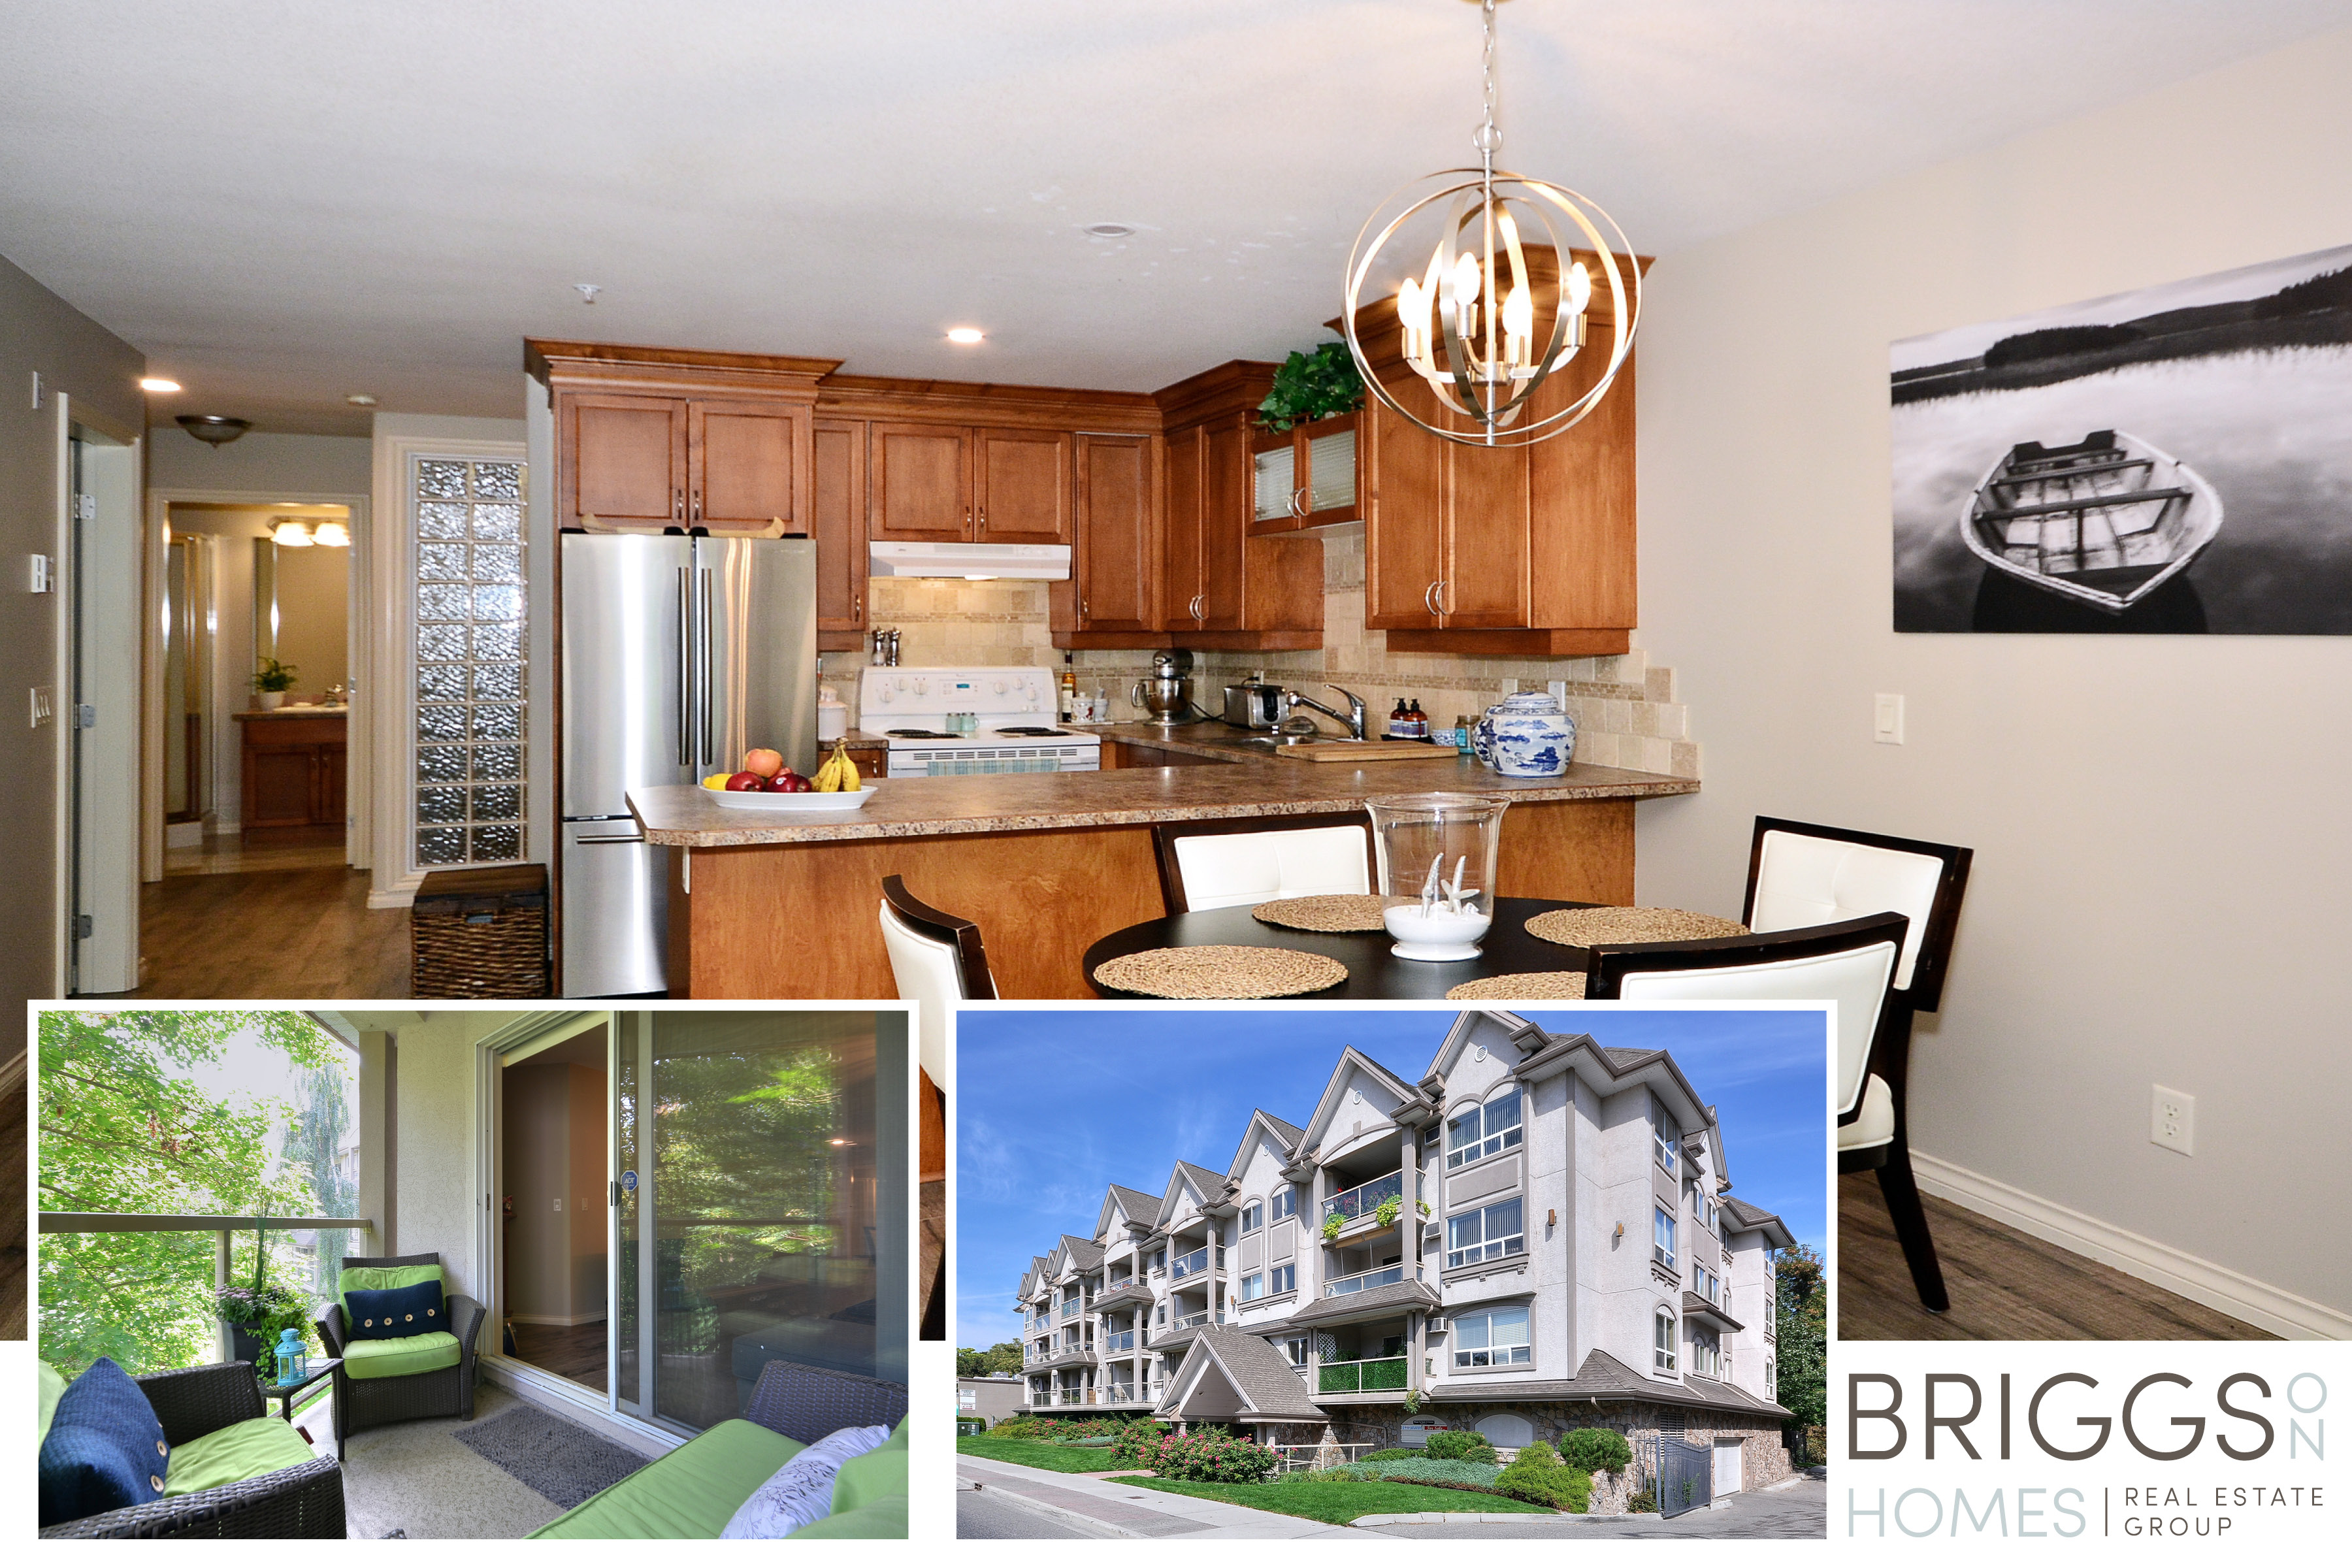 Just Listed! Cute Condo at The Brookshire - Kelowna Real Estate | Briggs On Homes Group | Jaime ...